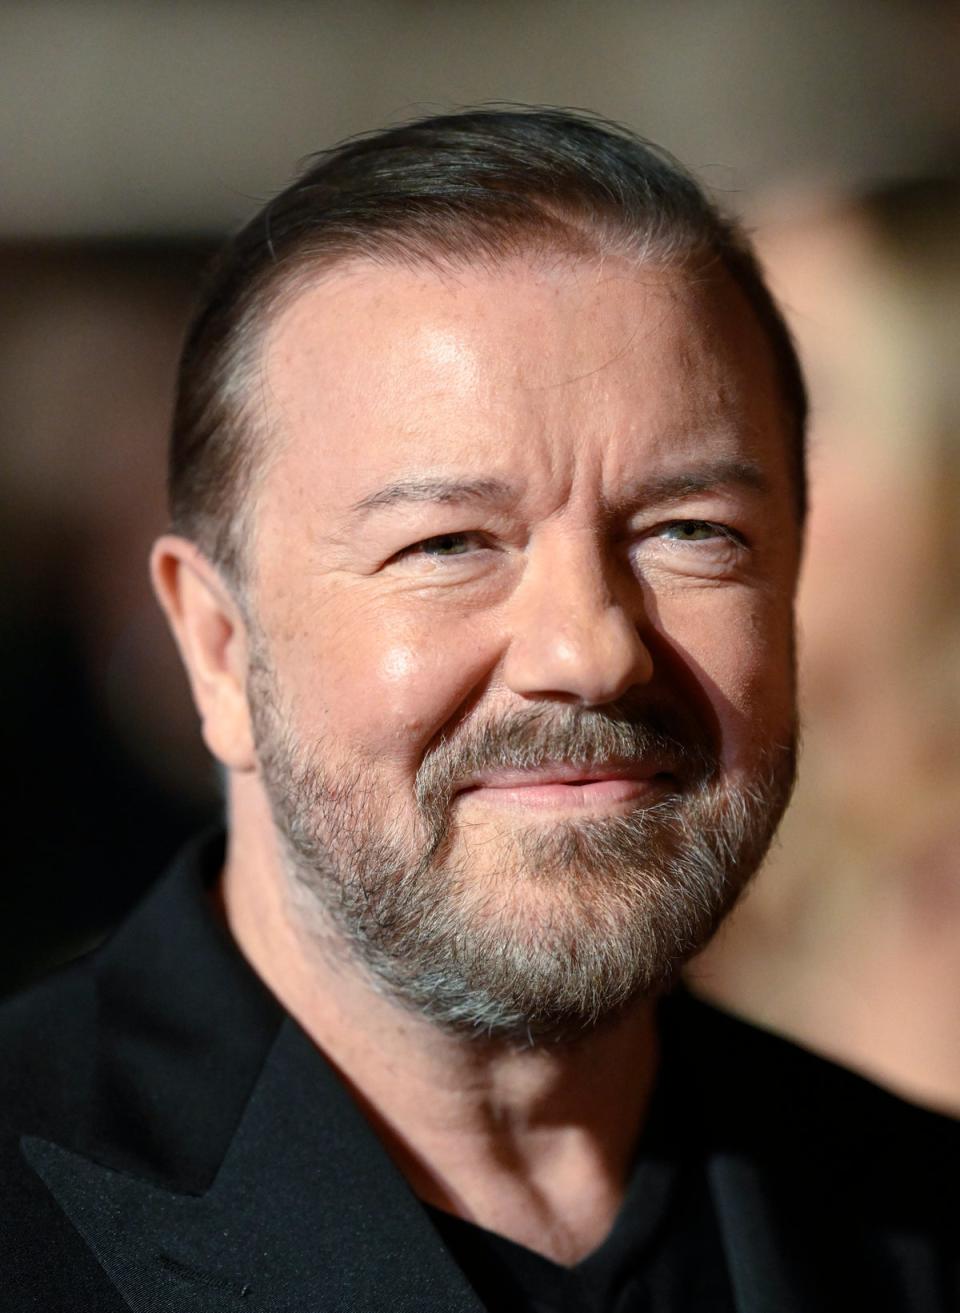 Ricky Gervais is taking no chances when it comes to personal safety (Gareth Cattermole/Getty Images)